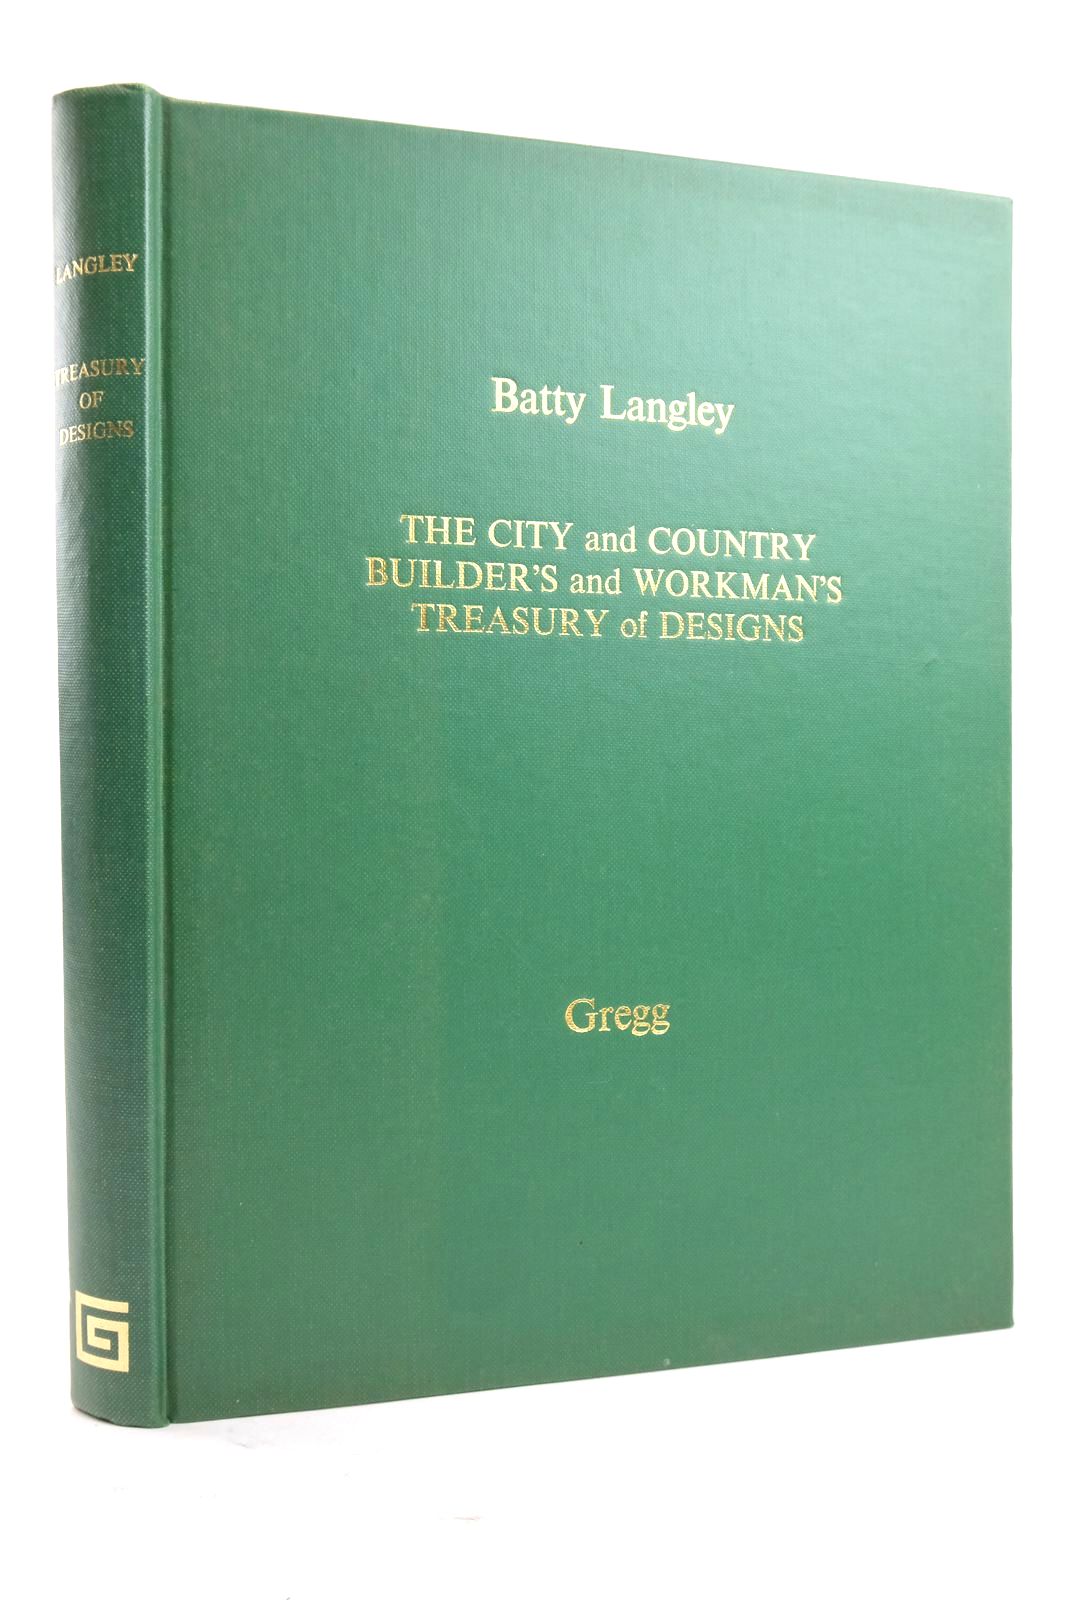 Photo of THE CITY AND COUNTRY BUILDER'S AND WORKMAN'S TREASURY OF DESIGNS written by Langley, Batty published by Gregg International (STOCK CODE: 2136431)  for sale by Stella & Rose's Books